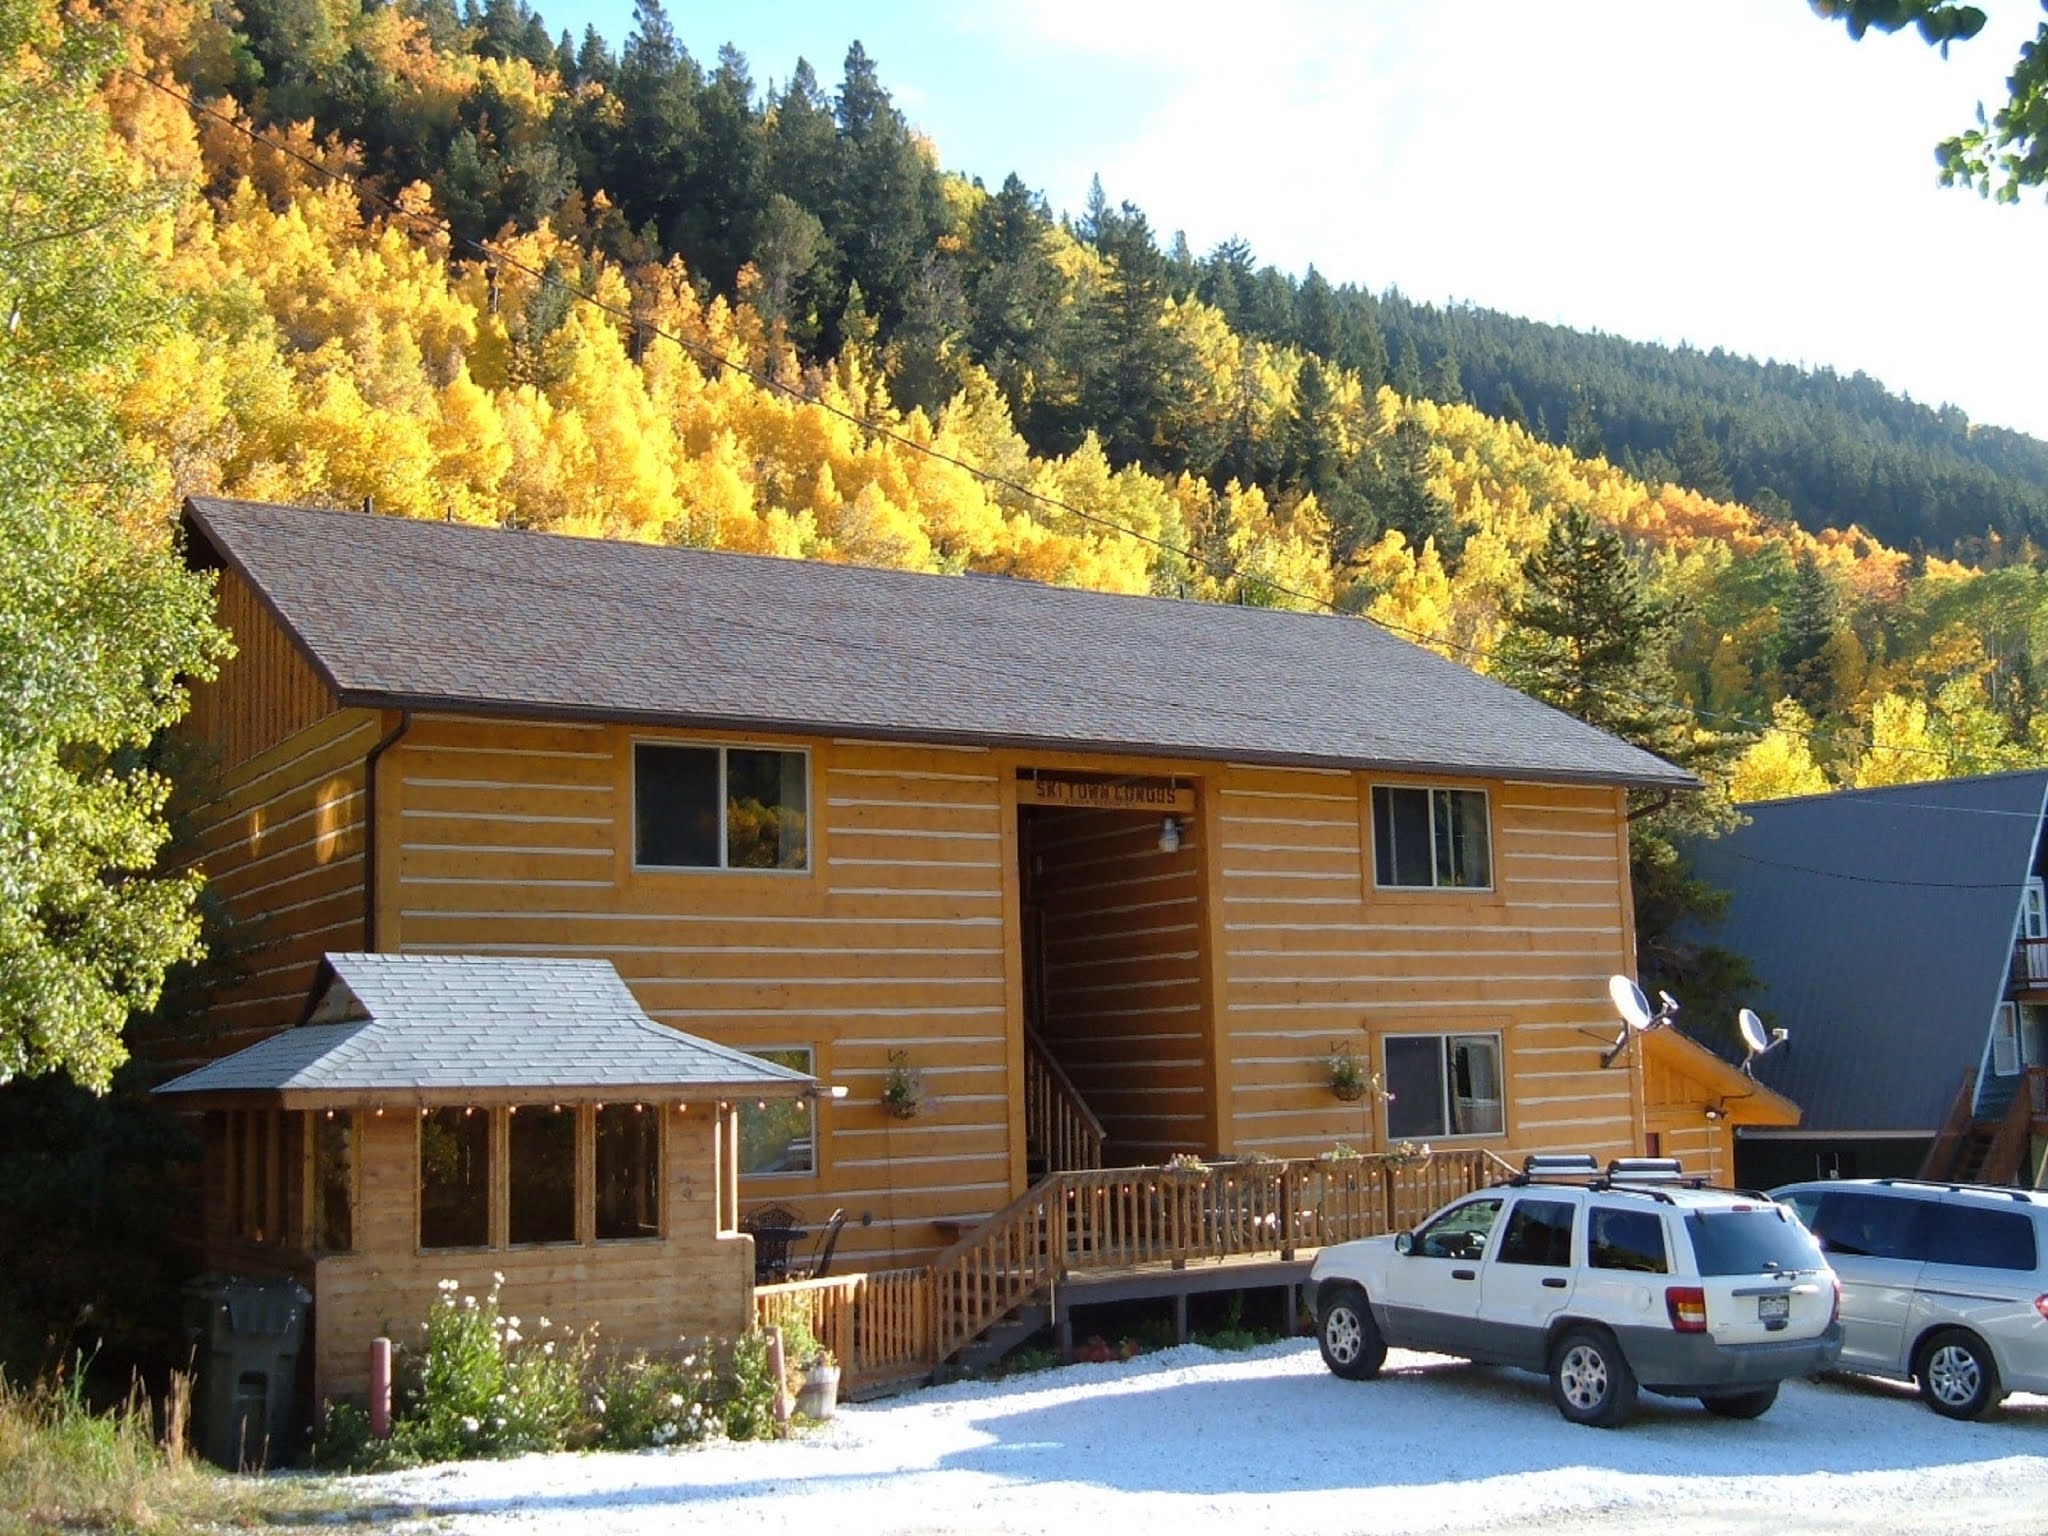 Exterior photo of condos with fall colors on the Aspen Trees all around.